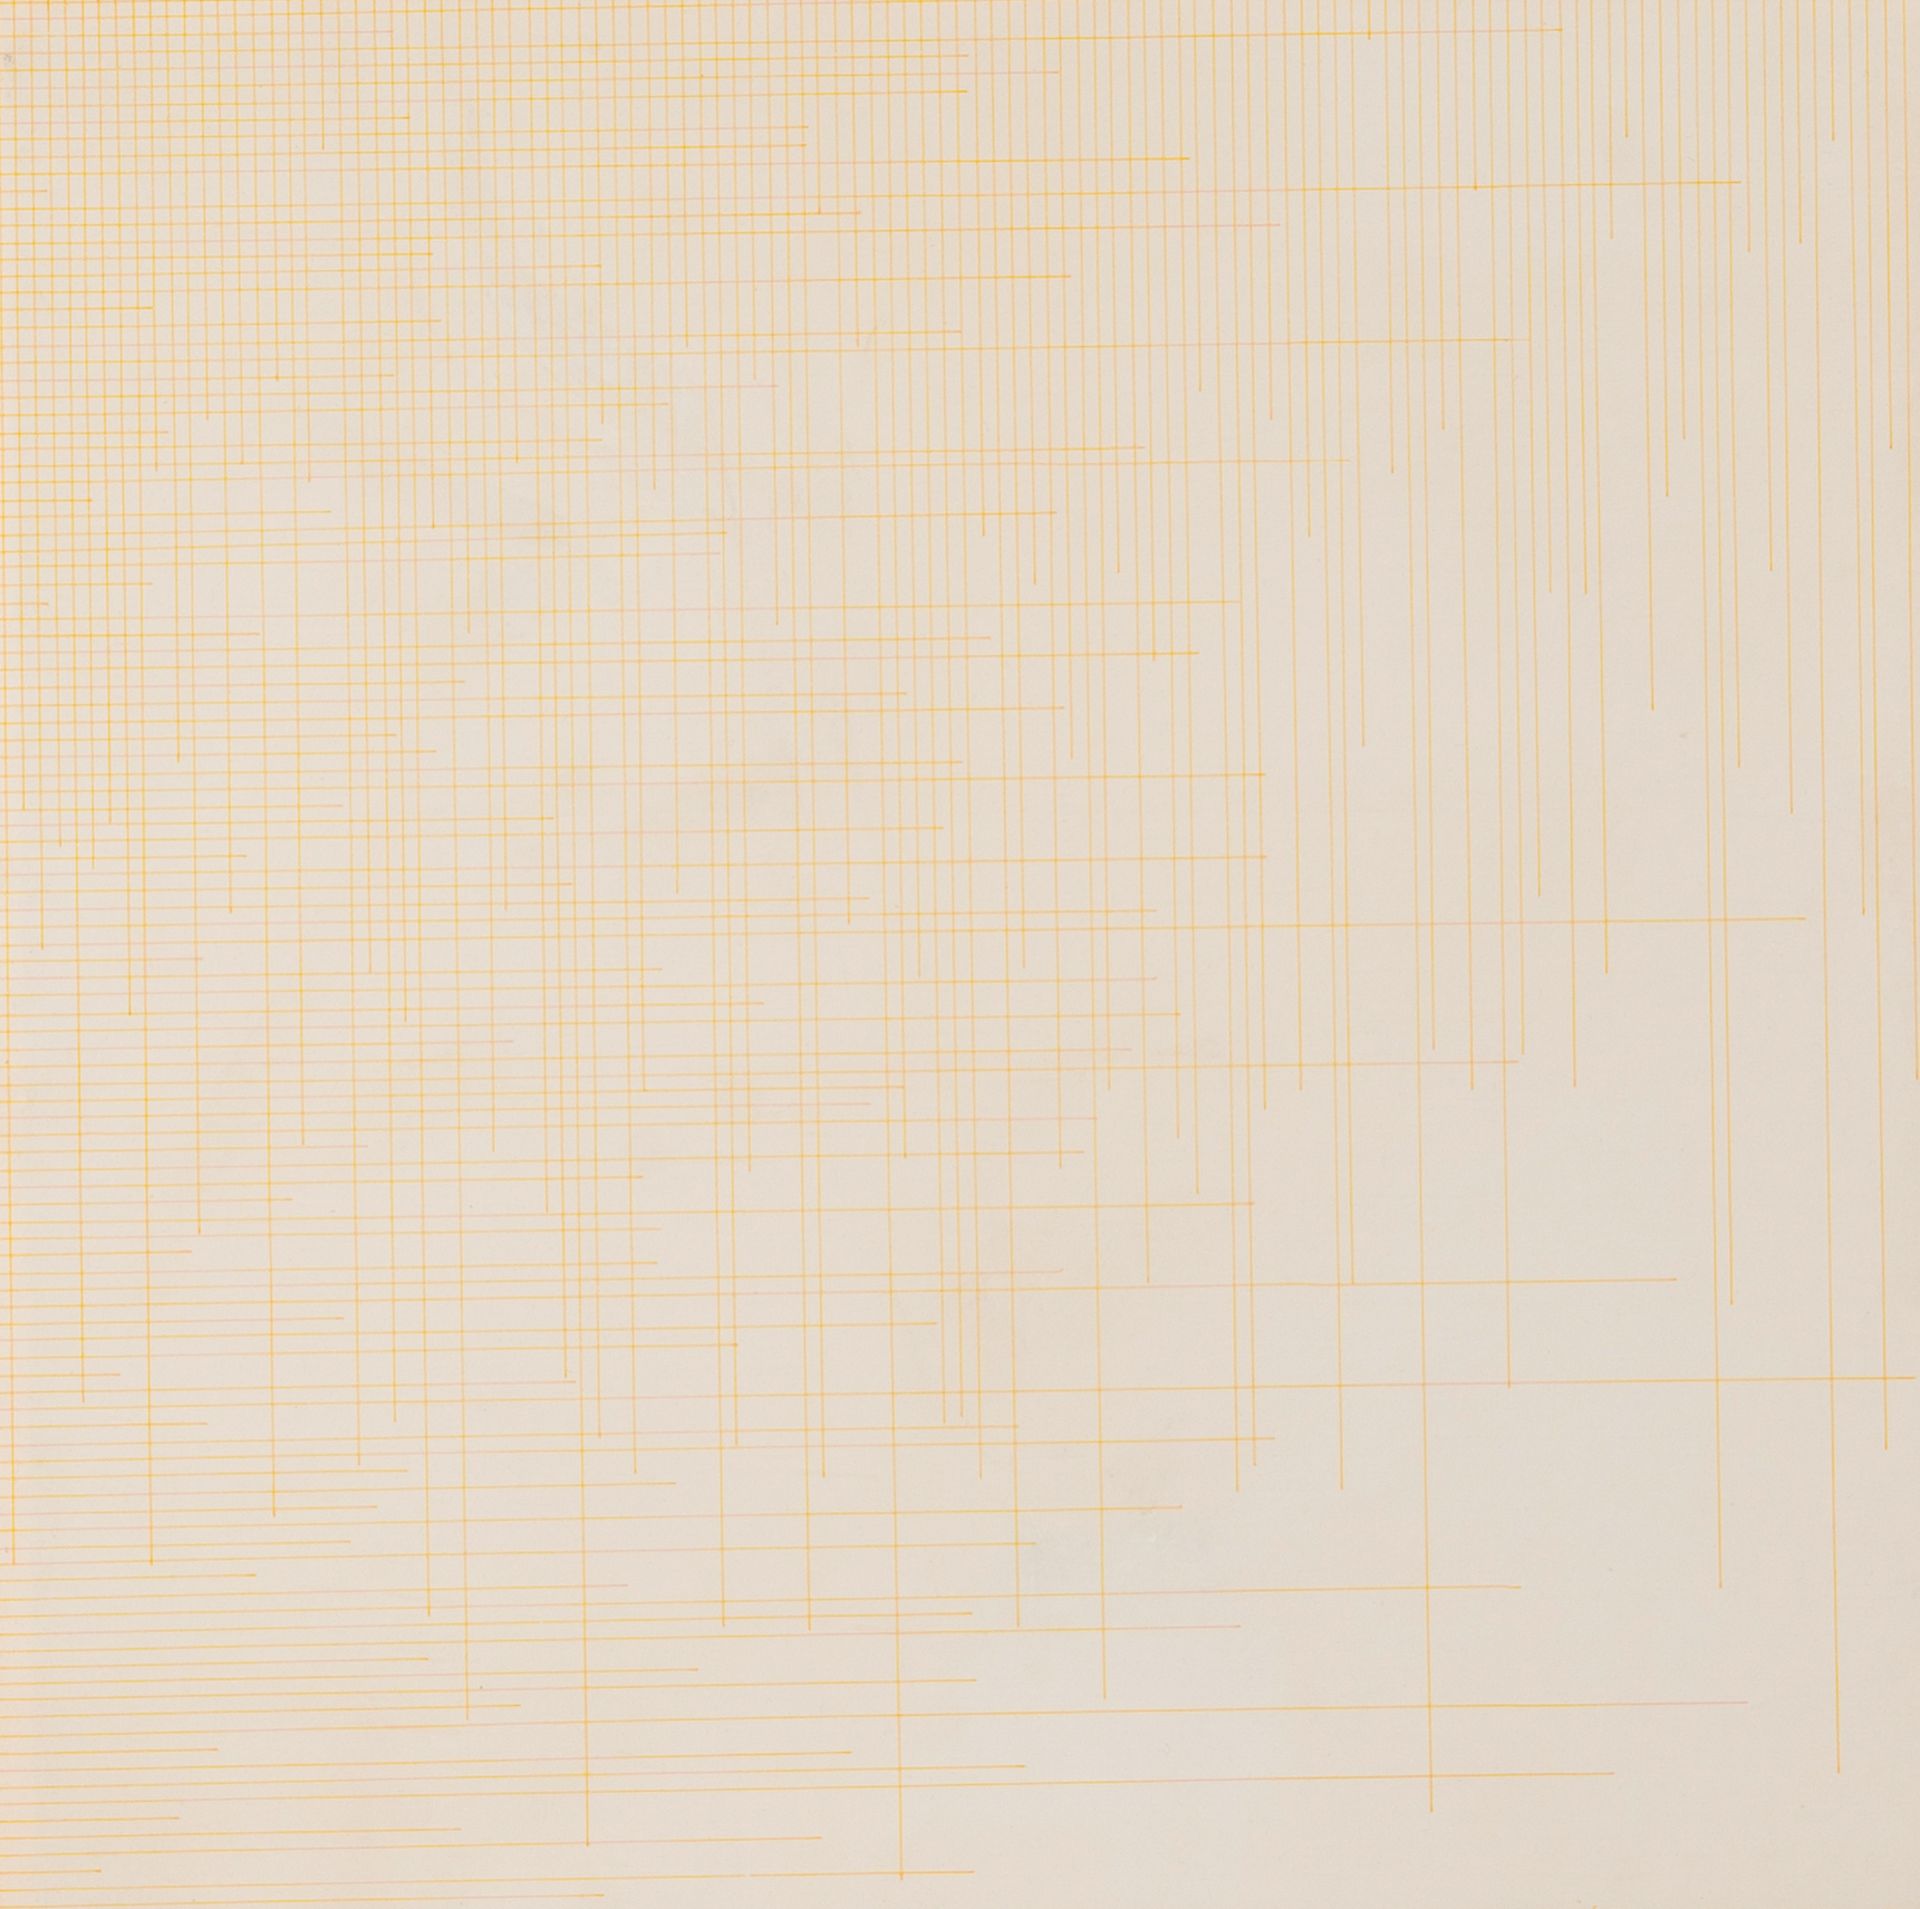 Sol Lewitt (1928-2007): 'Yellow lines from the left side and the top', ballpointpen on paper, dated